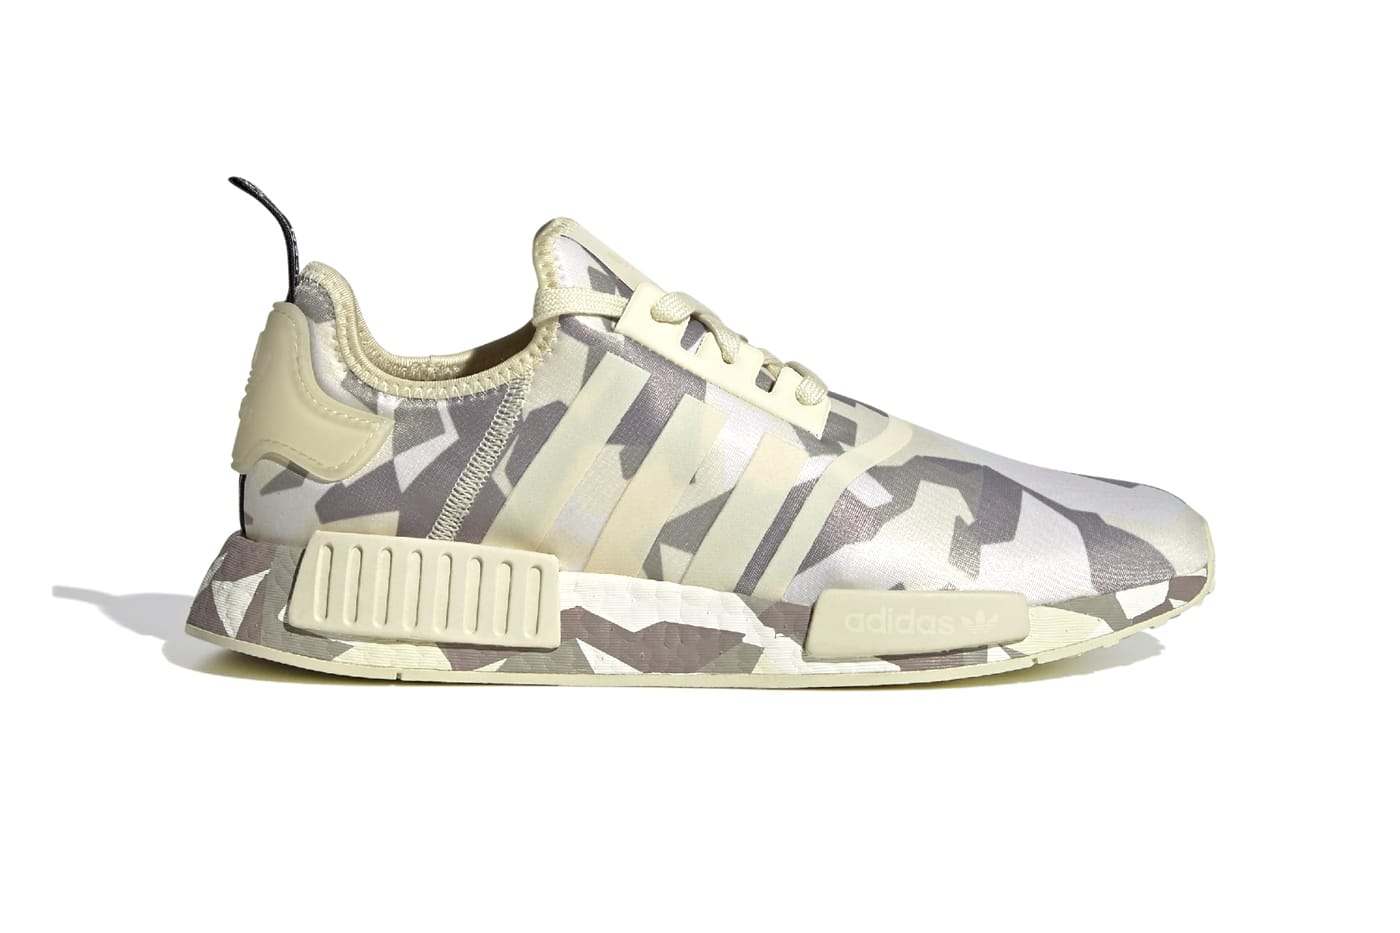 Adidas NMD R1 Black Burgundy Olive Exclusivecouk